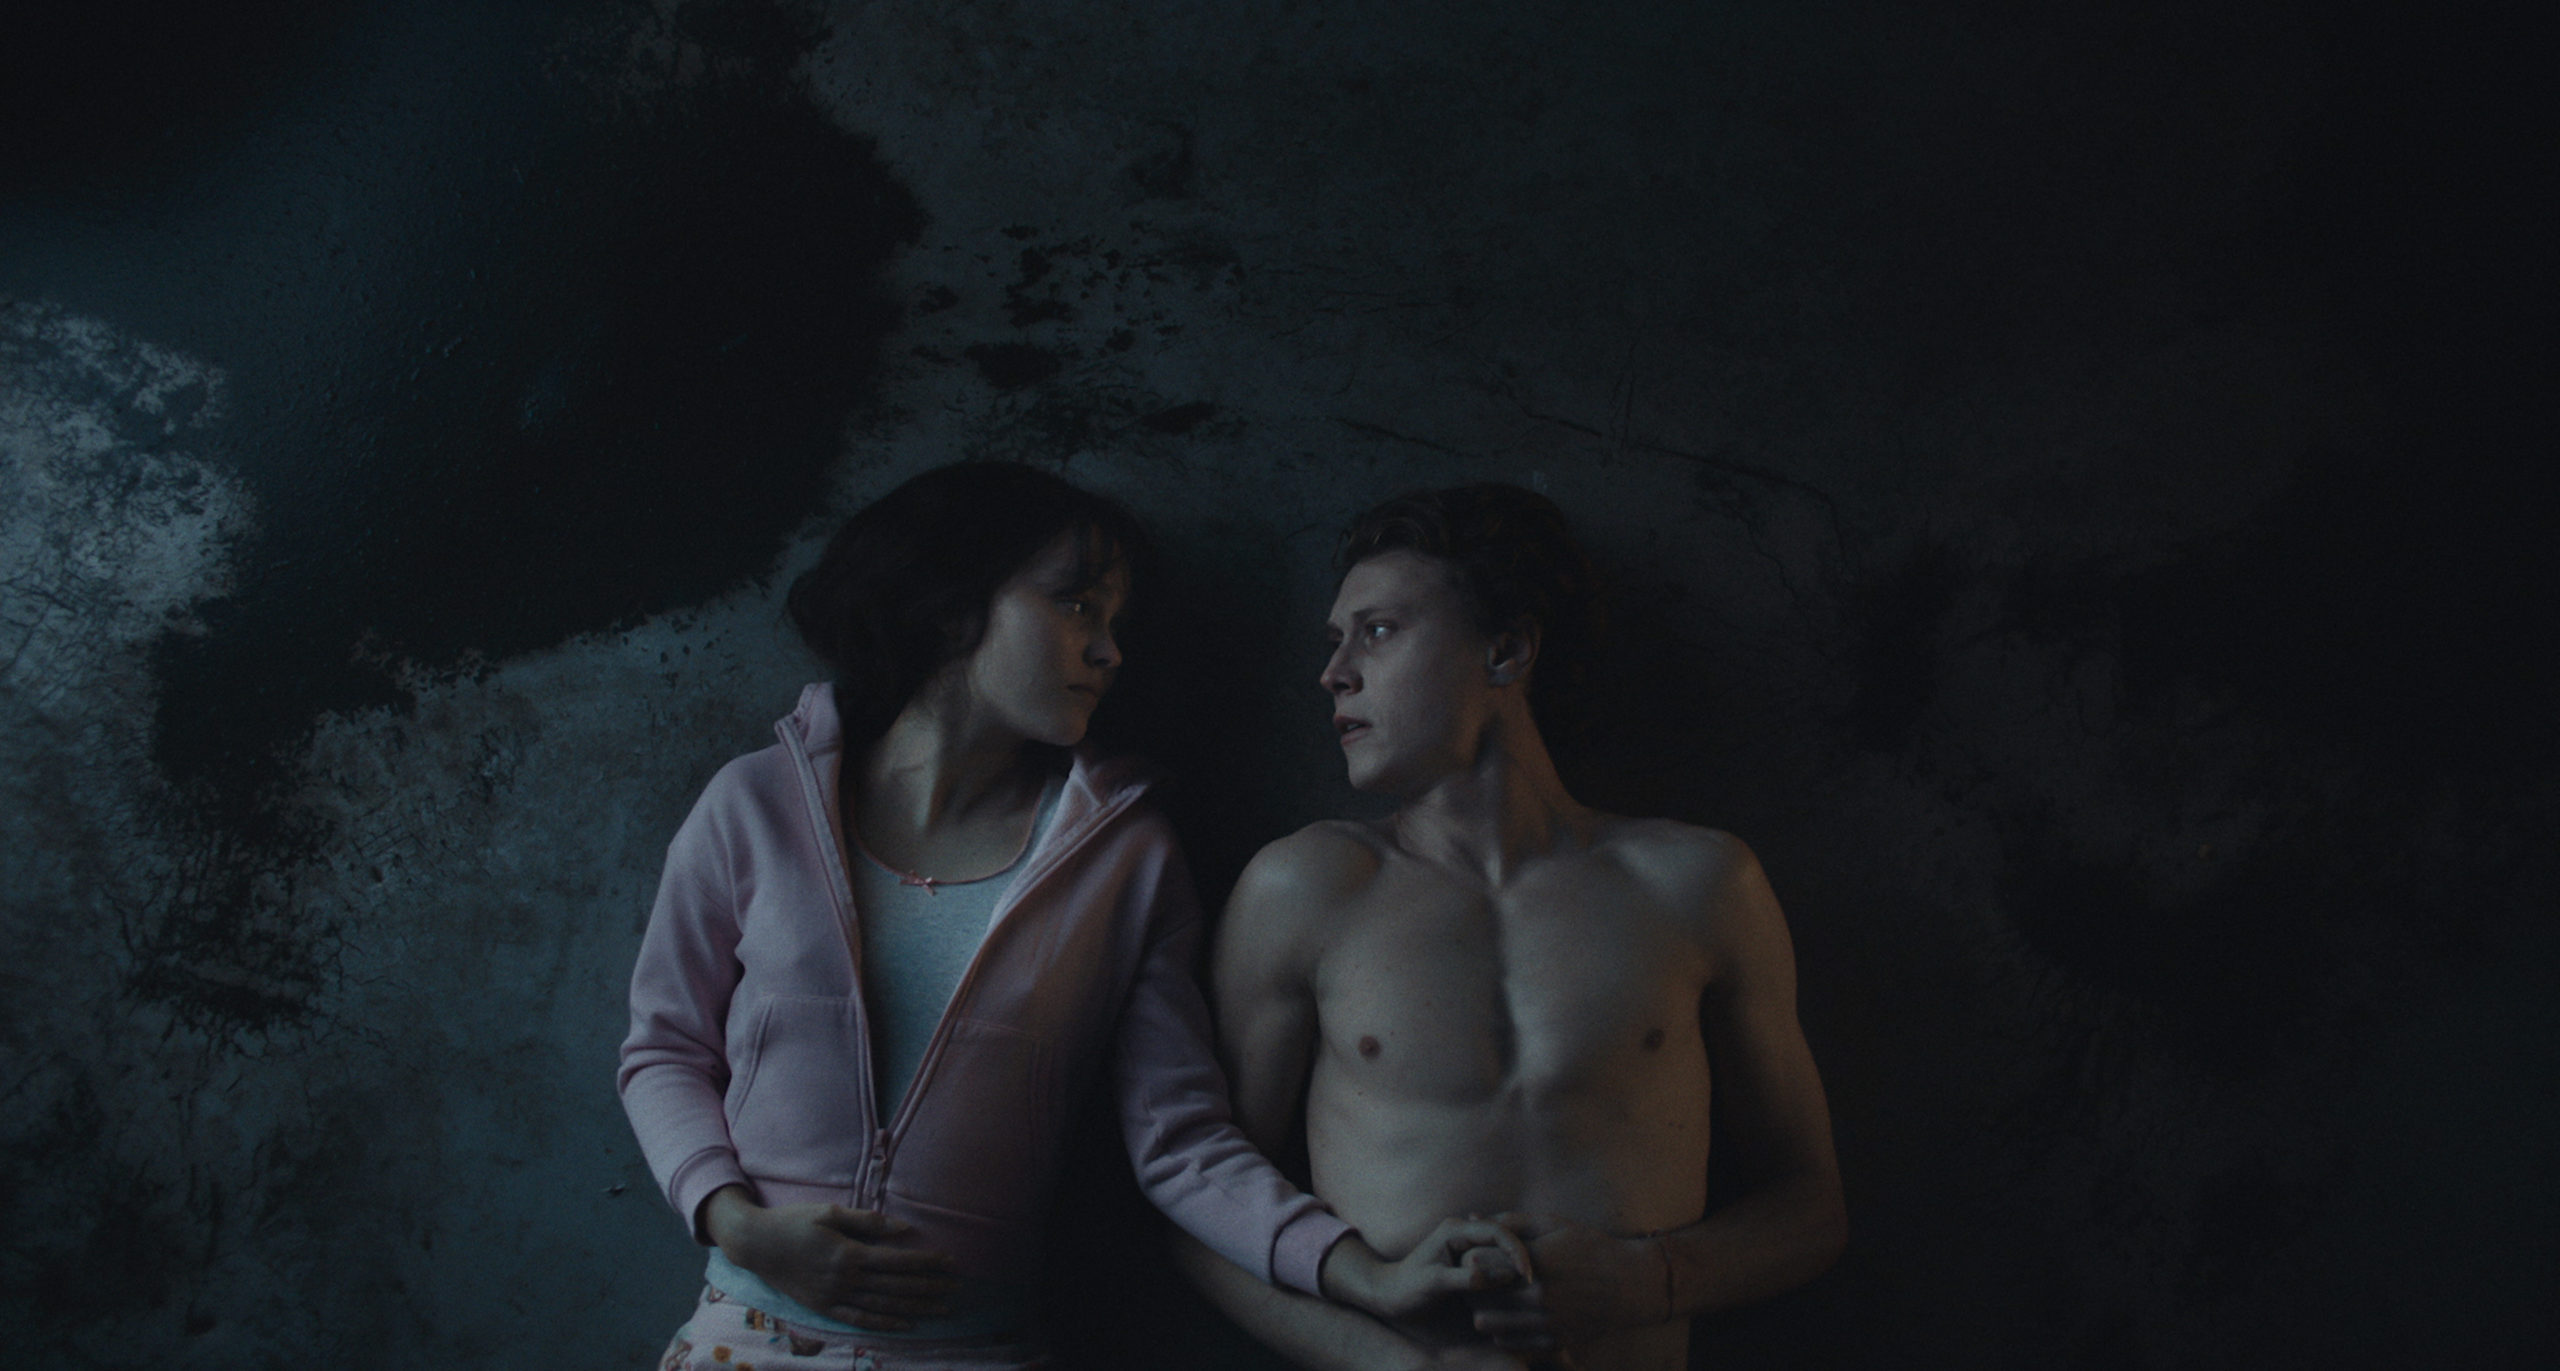 Wolf Character Posters of George MacKay and Lily-Rose Depp Free of Clothes